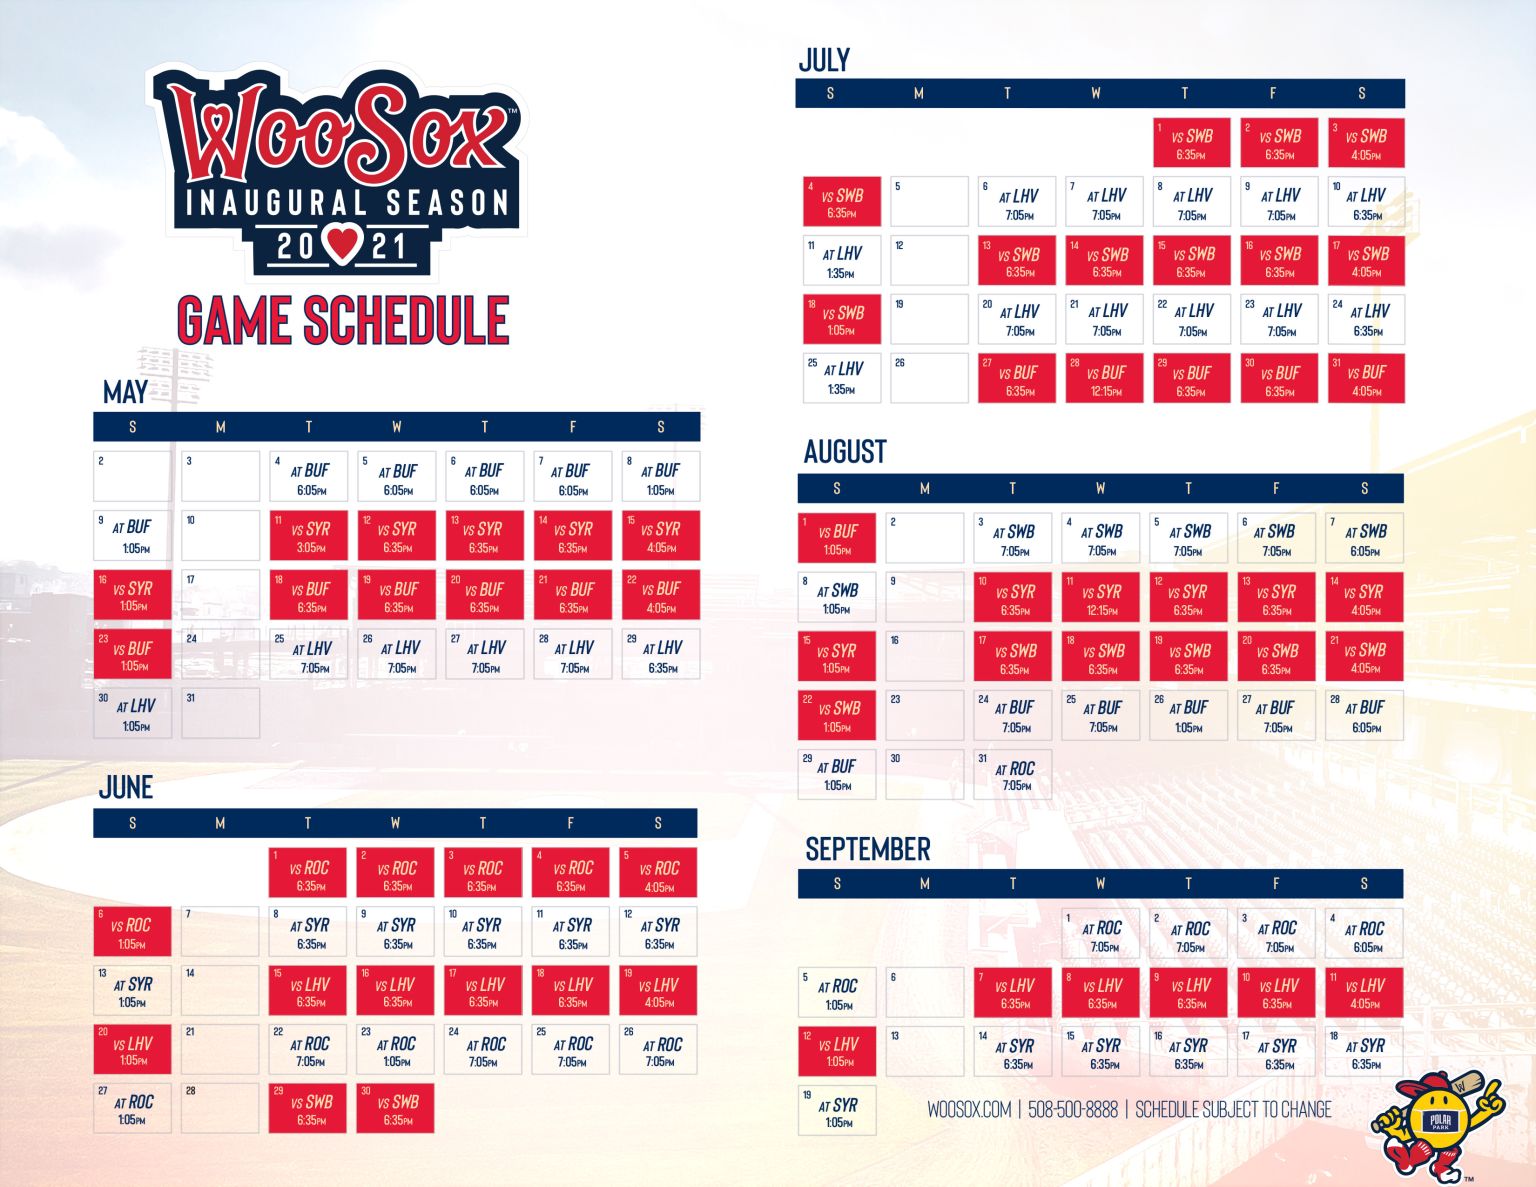 printable red sox schedule 2018